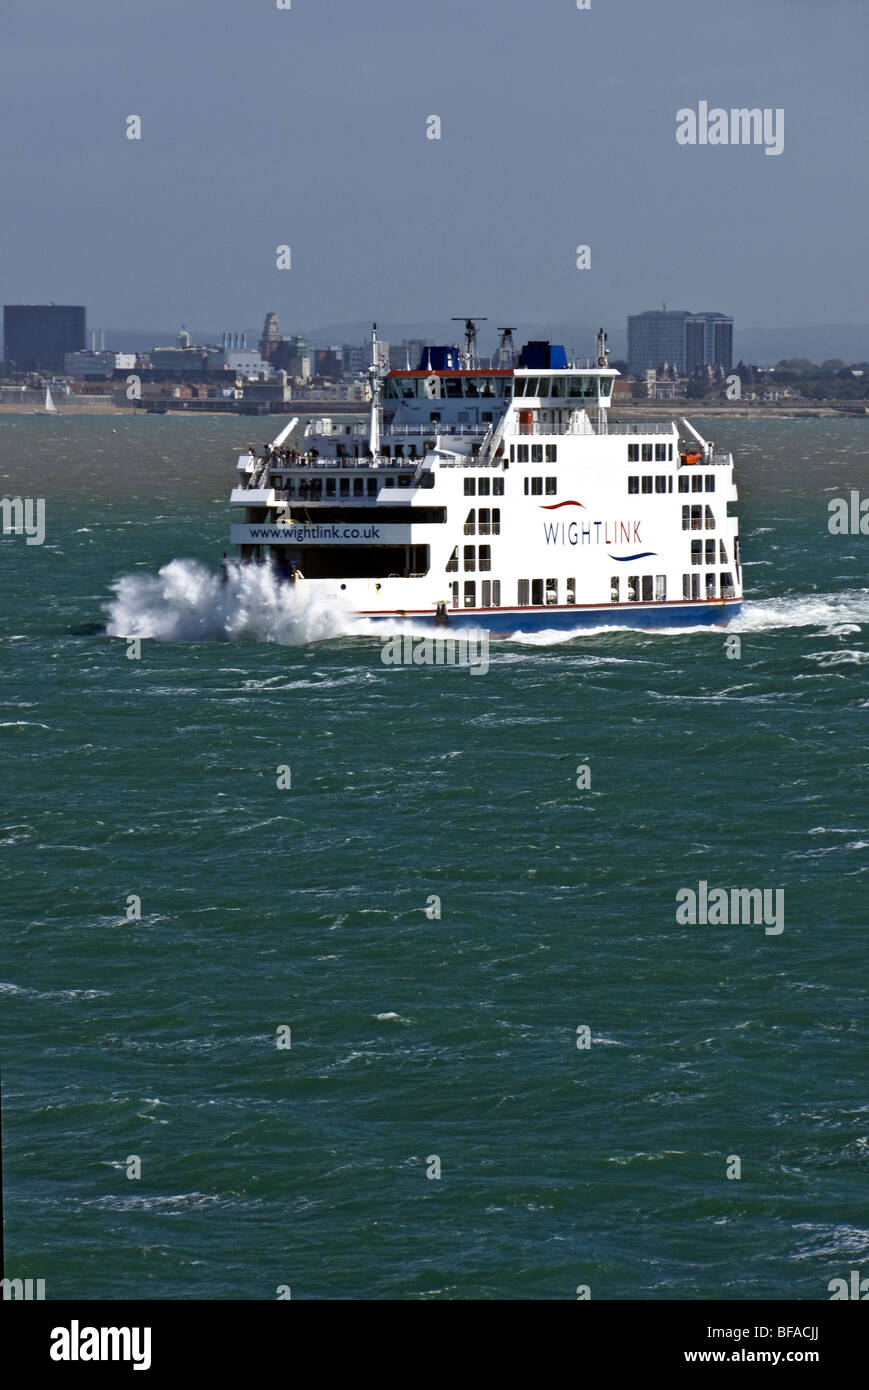 Wightlink Isle of Wight ferry St Clare en route from Portsmouth to Ryde Stock Photo